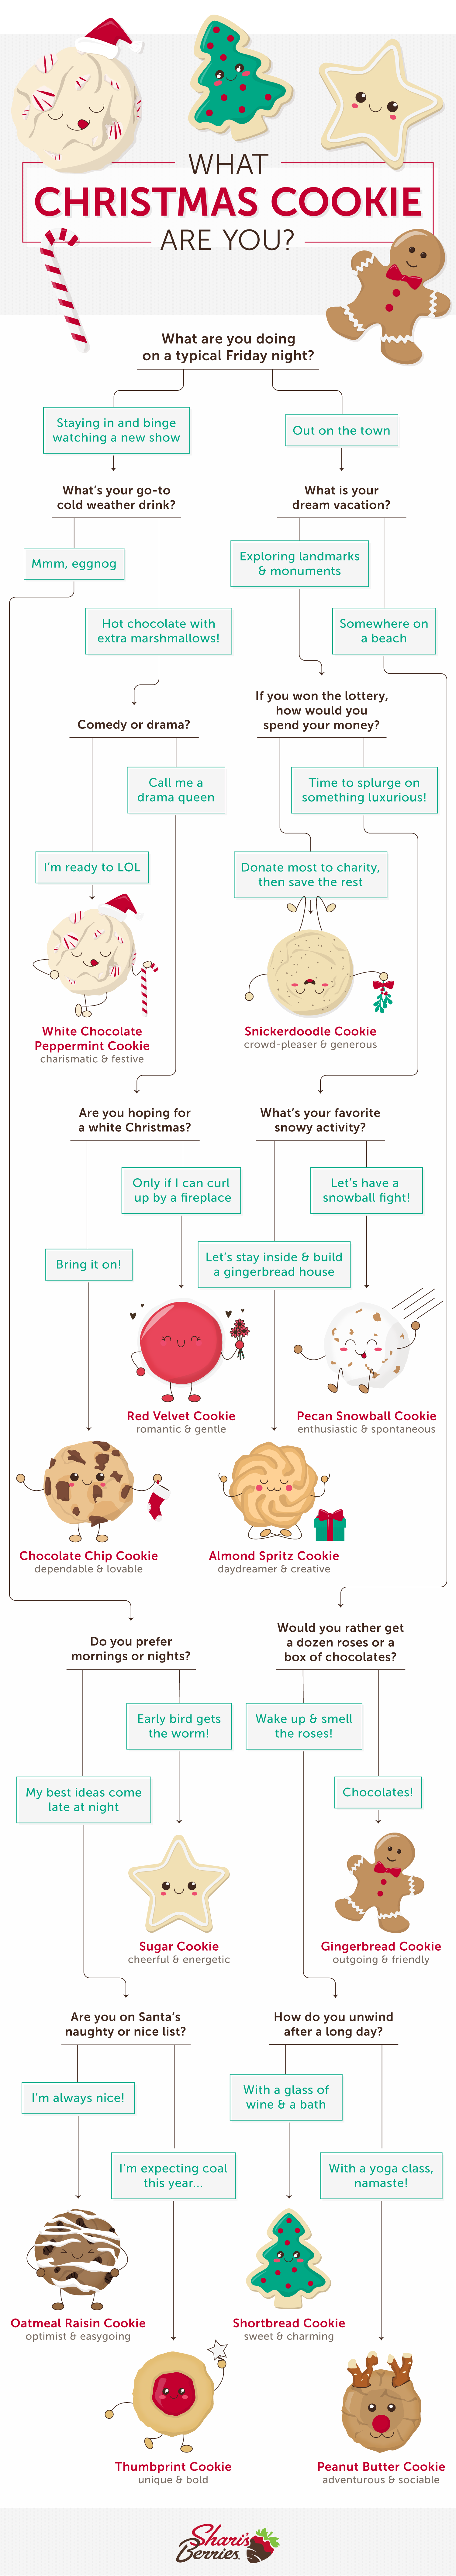 Infographic of what Christmas cookie are you.